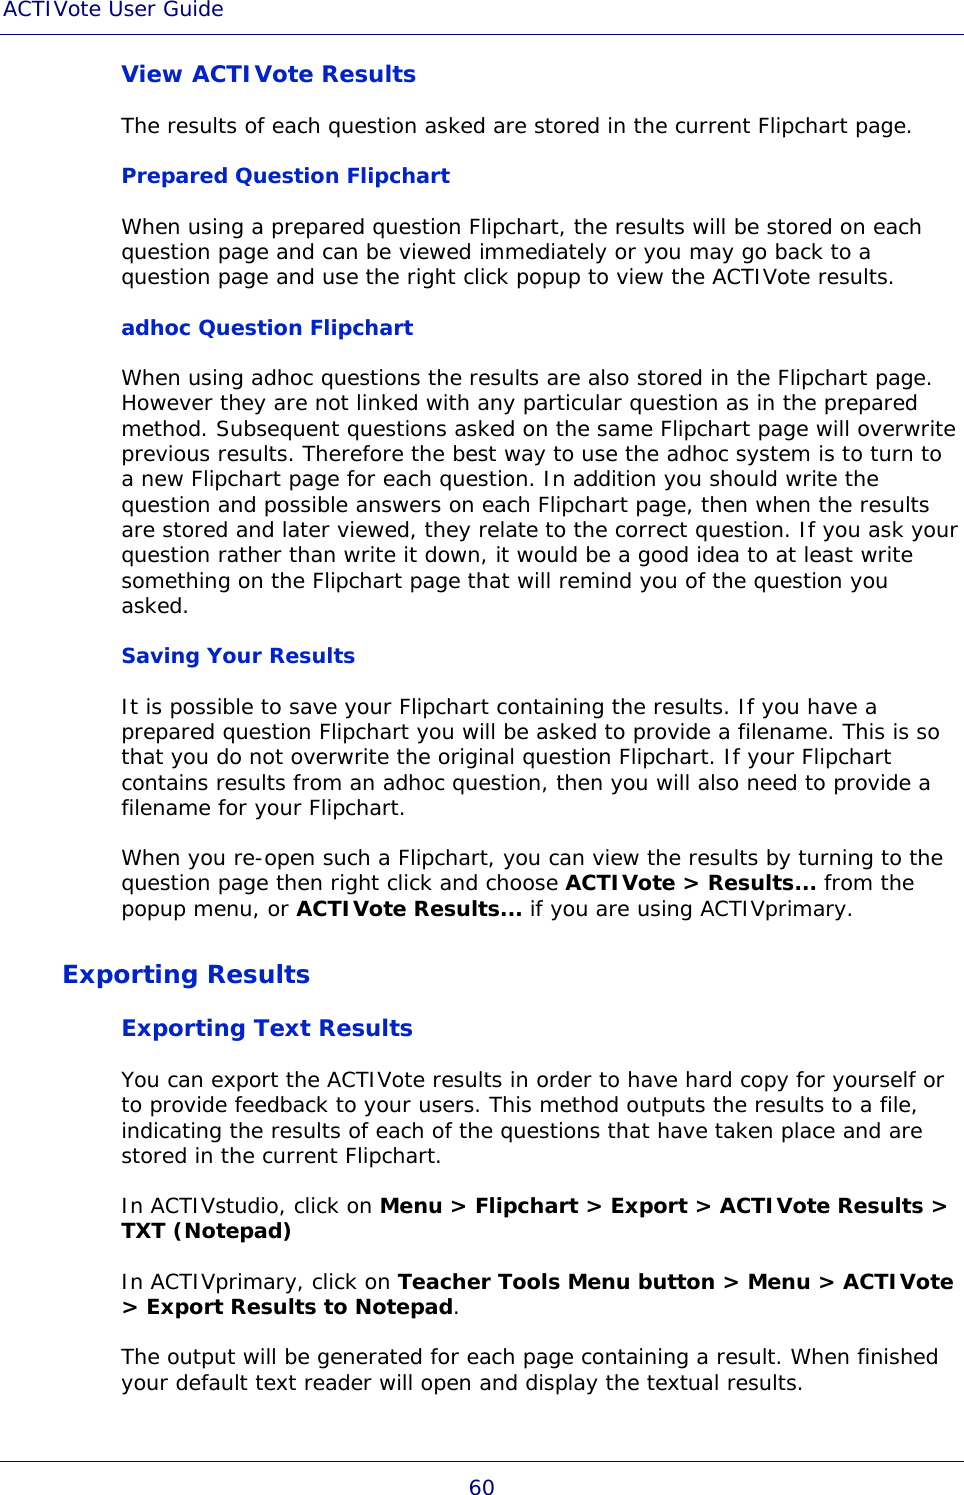 ACTIVote User Guide 60 View ACTIVote Results The results of each question asked are stored in the current Flipchart page. Prepared Question Flipchart When using a prepared question Flipchart, the results will be stored on each question page and can be viewed immediately or you may go back to a question page and use the right click popup to view the ACTIVote results. adhoc Question Flipchart When using adhoc questions the results are also stored in the Flipchart page. However they are not linked with any particular question as in the prepared method. Subsequent questions asked on the same Flipchart page will overwrite previous results. Therefore the best way to use the adhoc system is to turn to a new Flipchart page for each question. In addition you should write the question and possible answers on each Flipchart page, then when the results are stored and later viewed, they relate to the correct question. If you ask your question rather than write it down, it would be a good idea to at least write something on the Flipchart page that will remind you of the question you asked. Saving Your Results It is possible to save your Flipchart containing the results. If you have a prepared question Flipchart you will be asked to provide a filename. This is so that you do not overwrite the original question Flipchart. If your Flipchart contains results from an adhoc question, then you will also need to provide a filename for your Flipchart. When you re-open such a Flipchart, you can view the results by turning to the question page then right click and choose ACTIVote &gt; Results... from the popup menu, or ACTIVote Results... if you are using ACTIVprimary. Exporting Results Exporting Text Results You can export the ACTIVote results in order to have hard copy for yourself or to provide feedback to your users. This method outputs the results to a file, indicating the results of each of the questions that have taken place and are stored in the current Flipchart. In ACTIVstudio, click on Menu &gt; Flipchart &gt; Export &gt; ACTIVote Results &gt; TXT (Notepad) In ACTIVprimary, click on Teacher Tools Menu button &gt; Menu &gt; ACTIVote &gt; Export Results to Notepad. The output will be generated for each page containing a result. When finished your default text reader will open and display the textual results.  